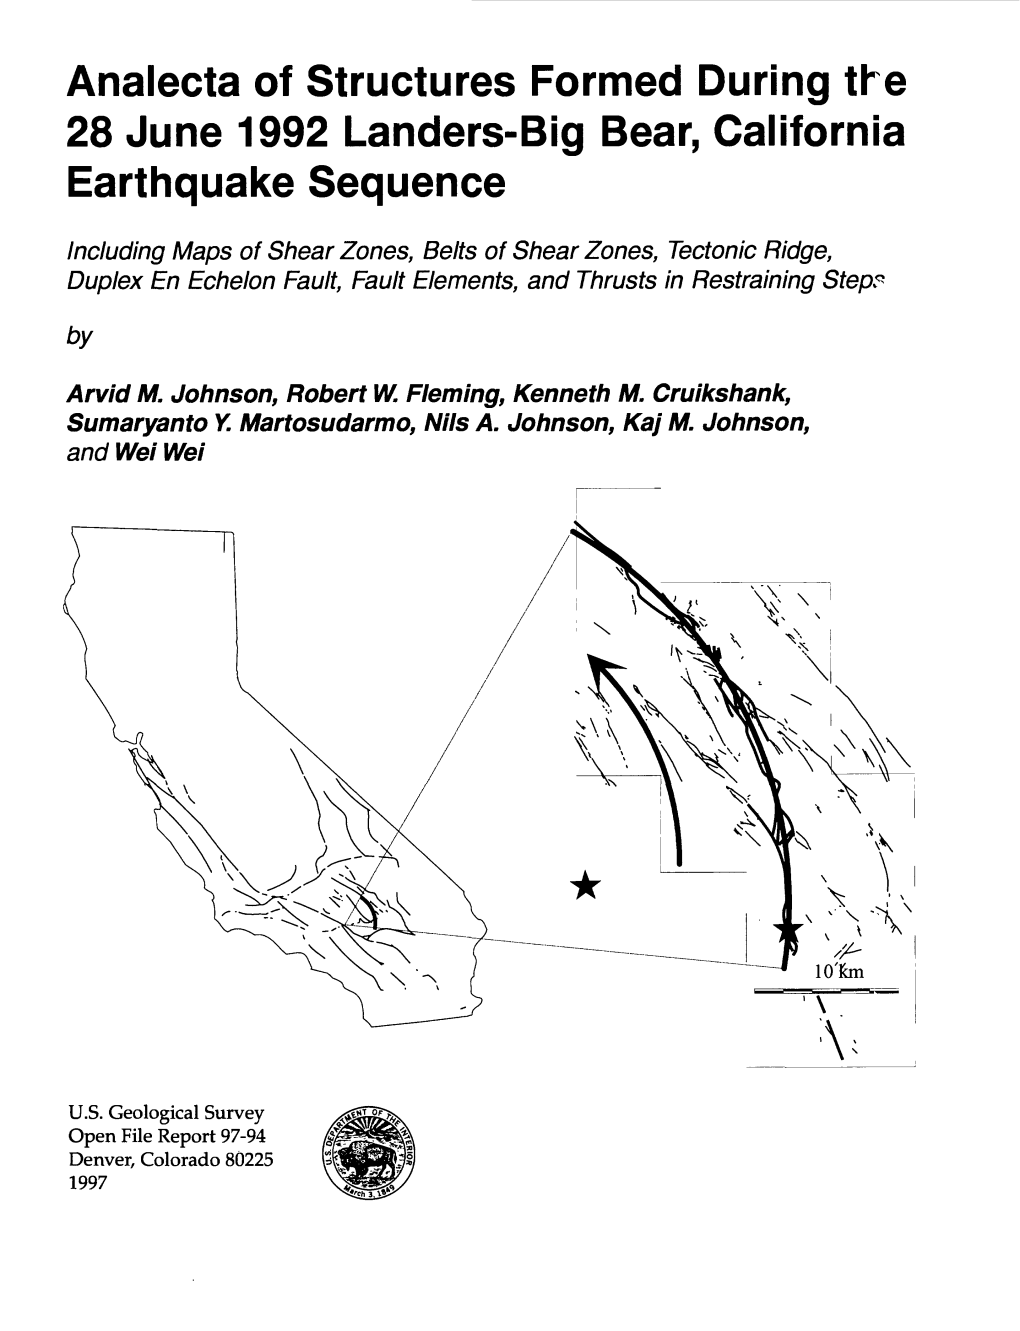 Analecta of Structures Formed During the 28 June 1992 Landers-Big Bear, California Earthquake Sequence